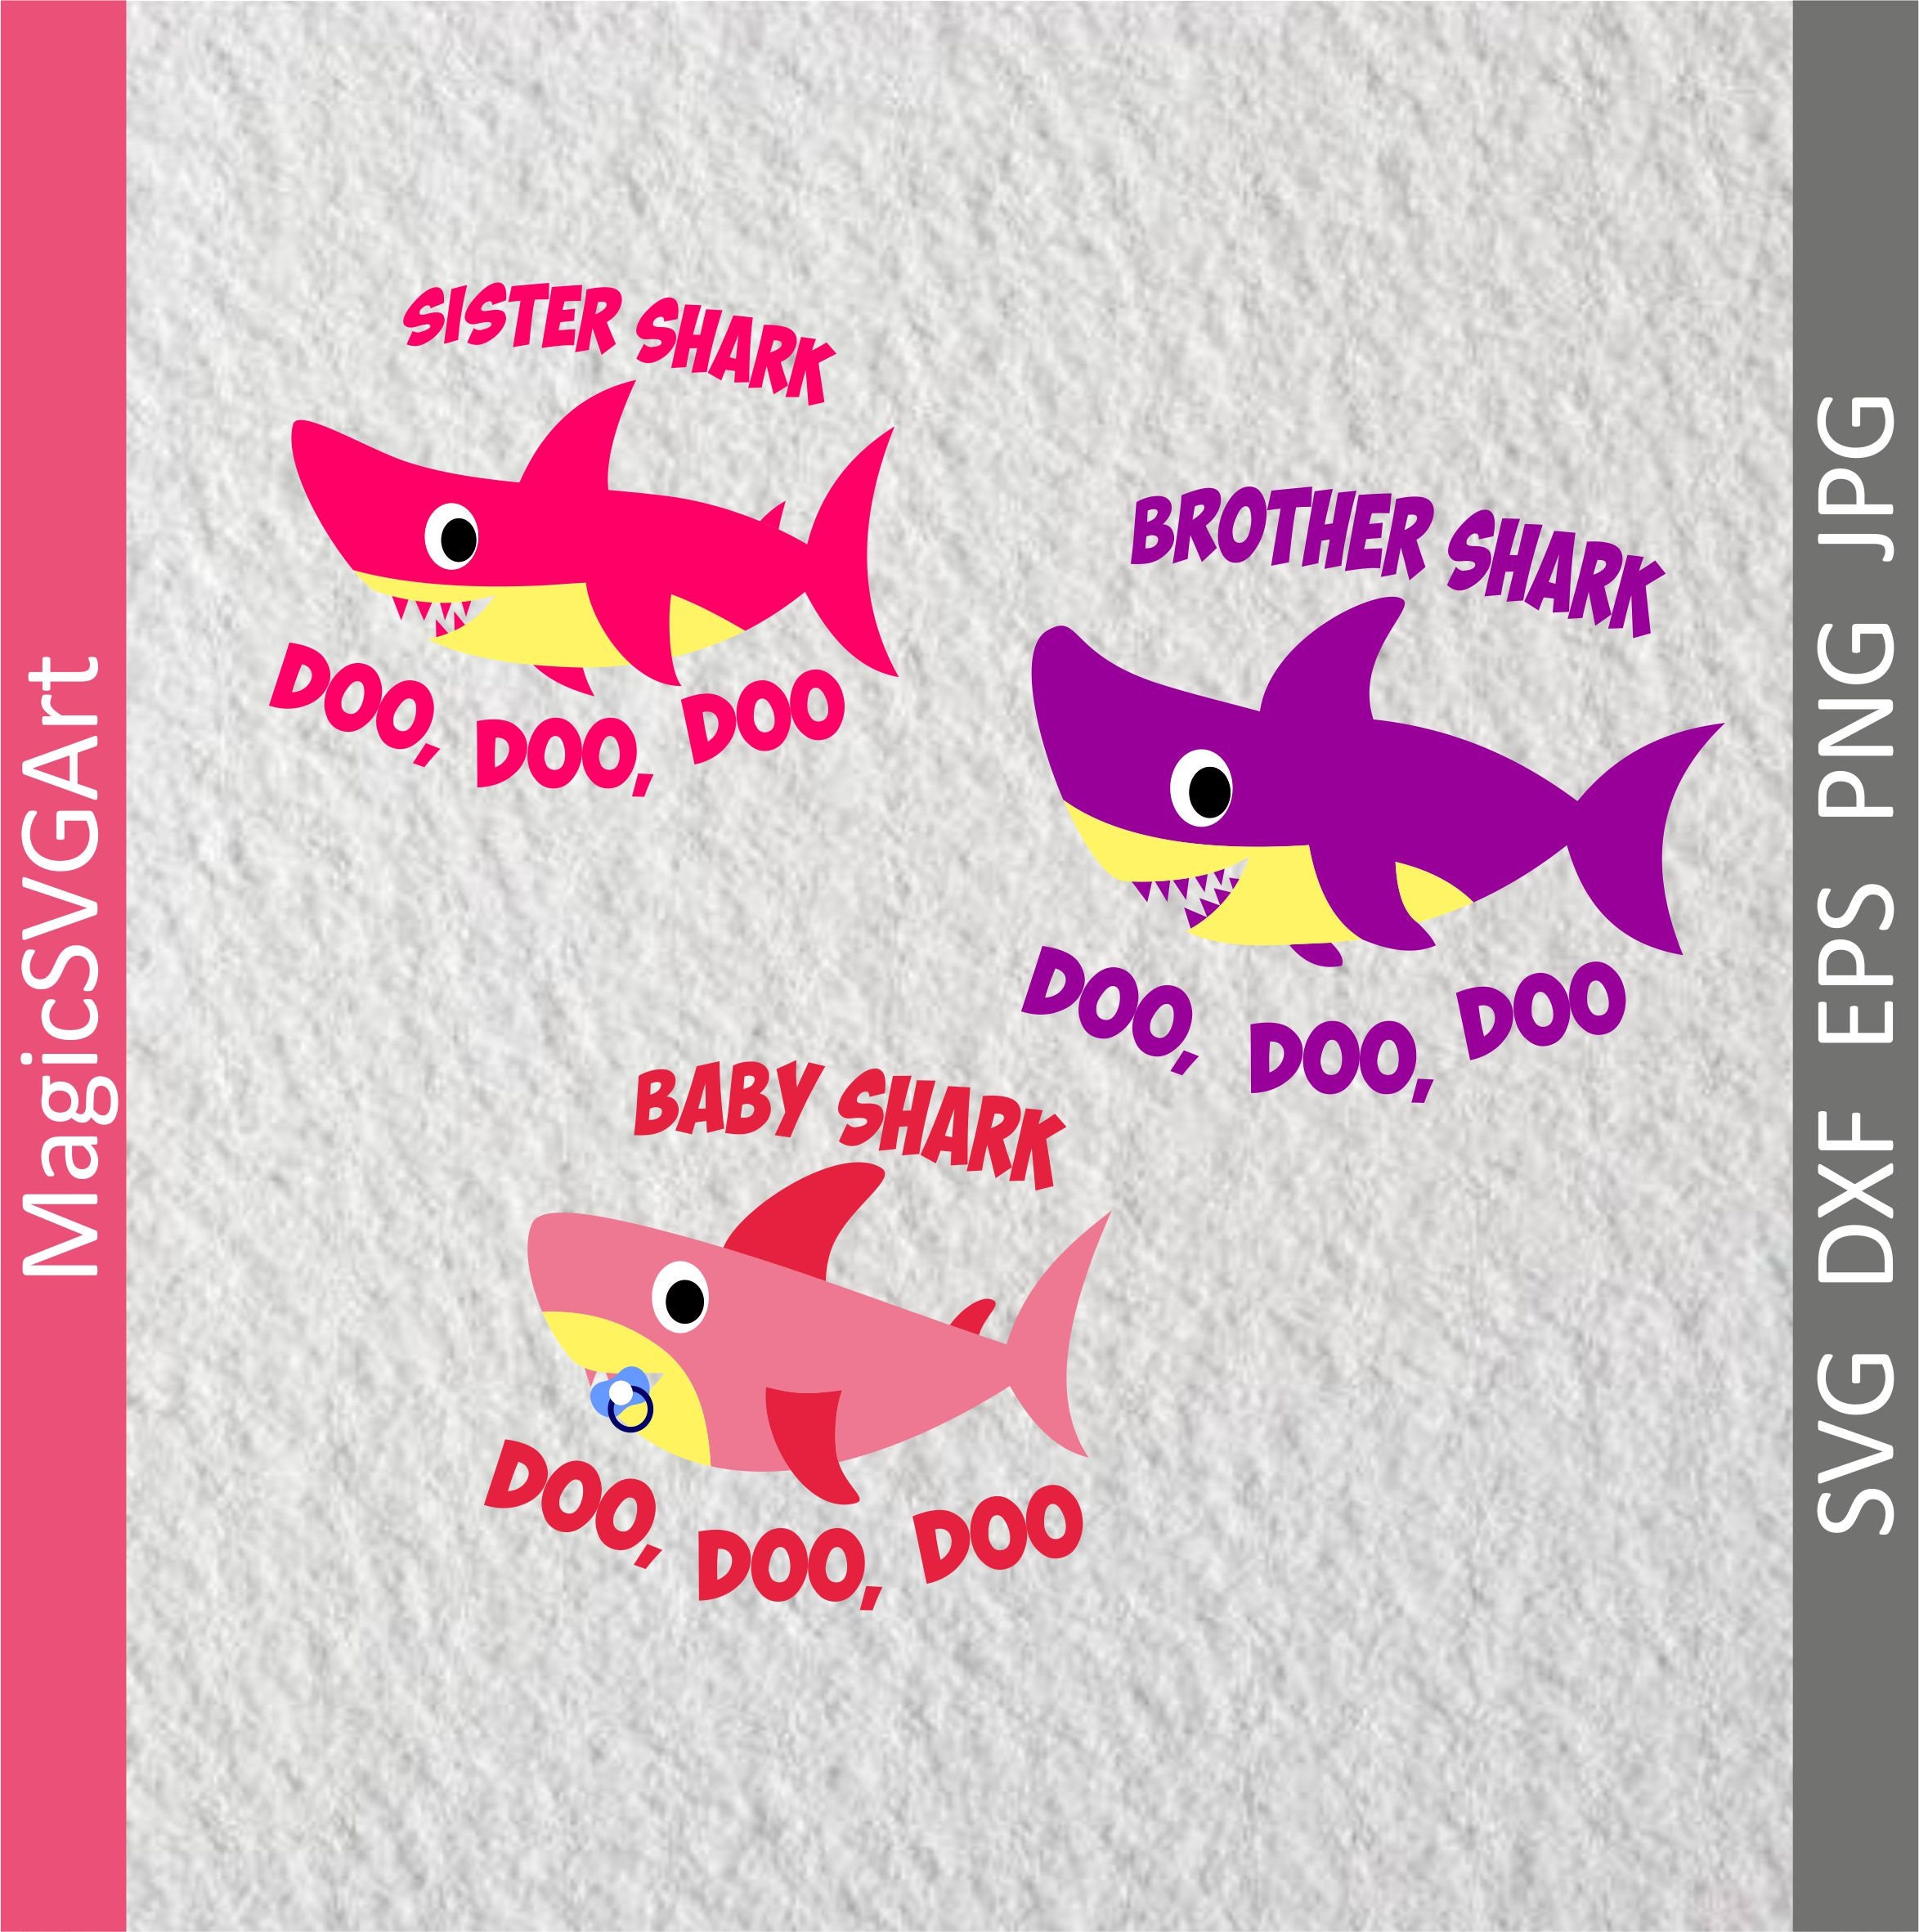 Download Brother sister baby Sharks Doo Doo Doo svg dxf eps png | Etsy